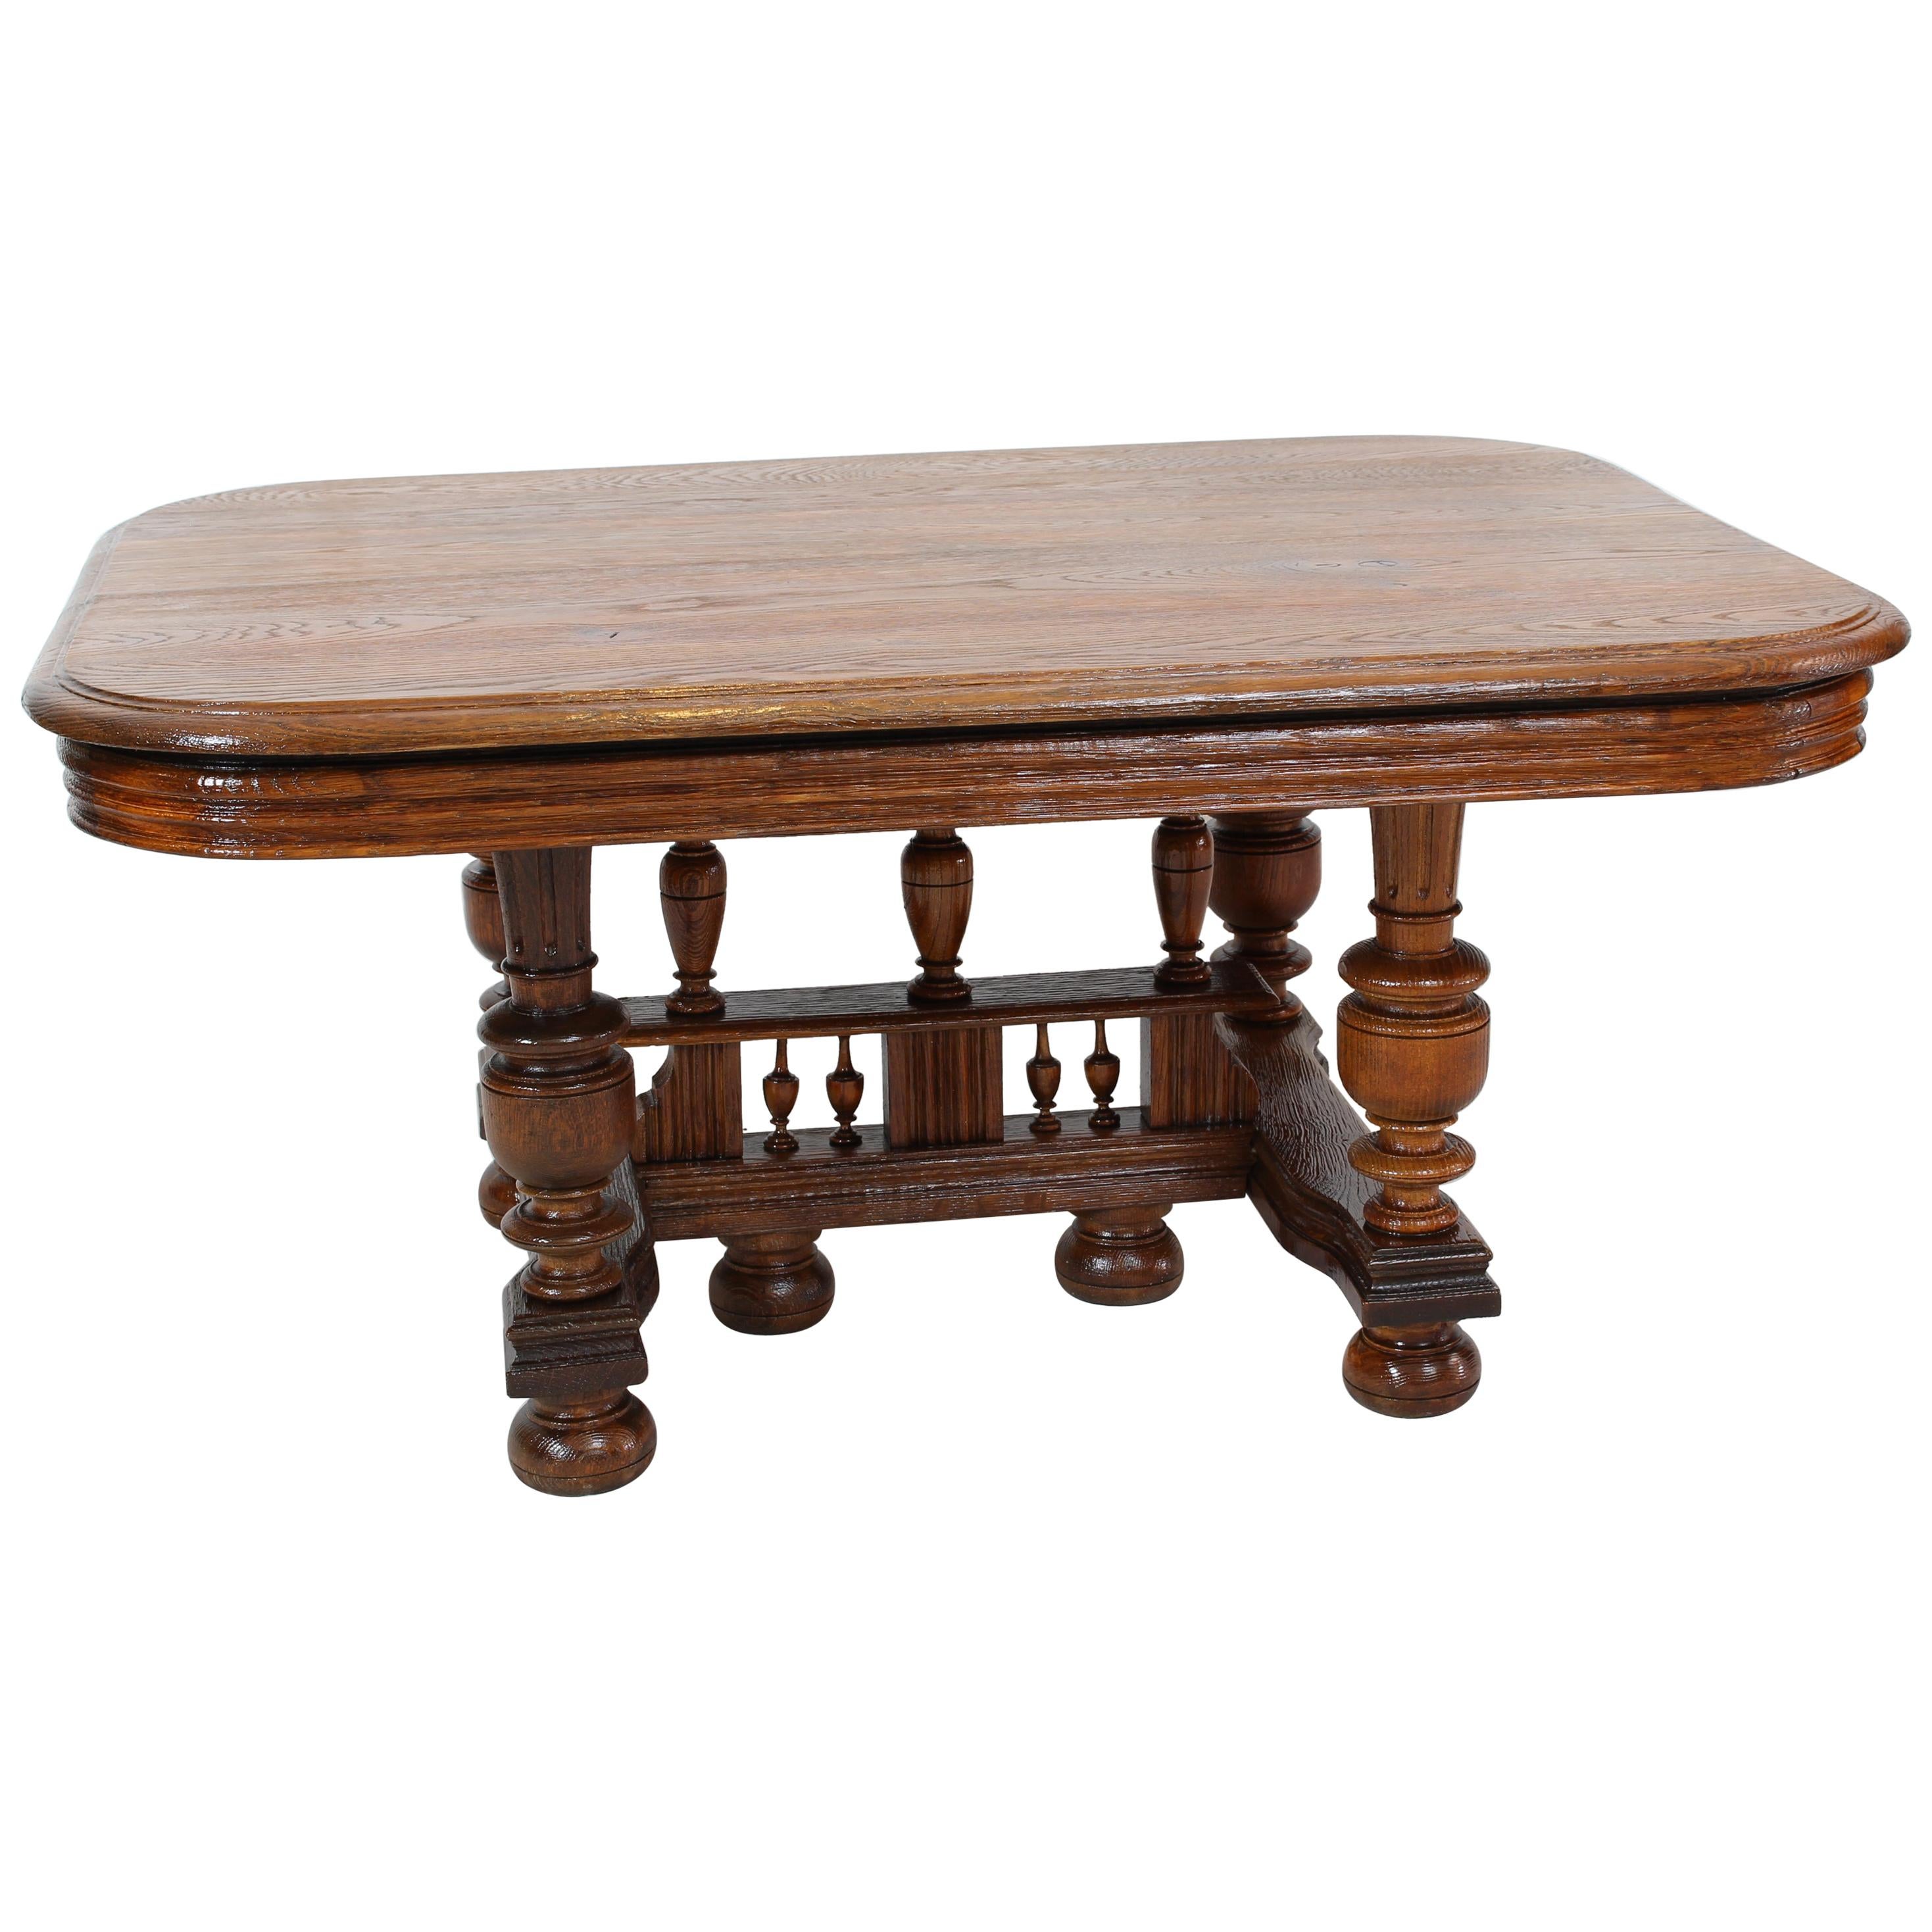 Oakwood Henry Deux Couch Table from France, circa 1880